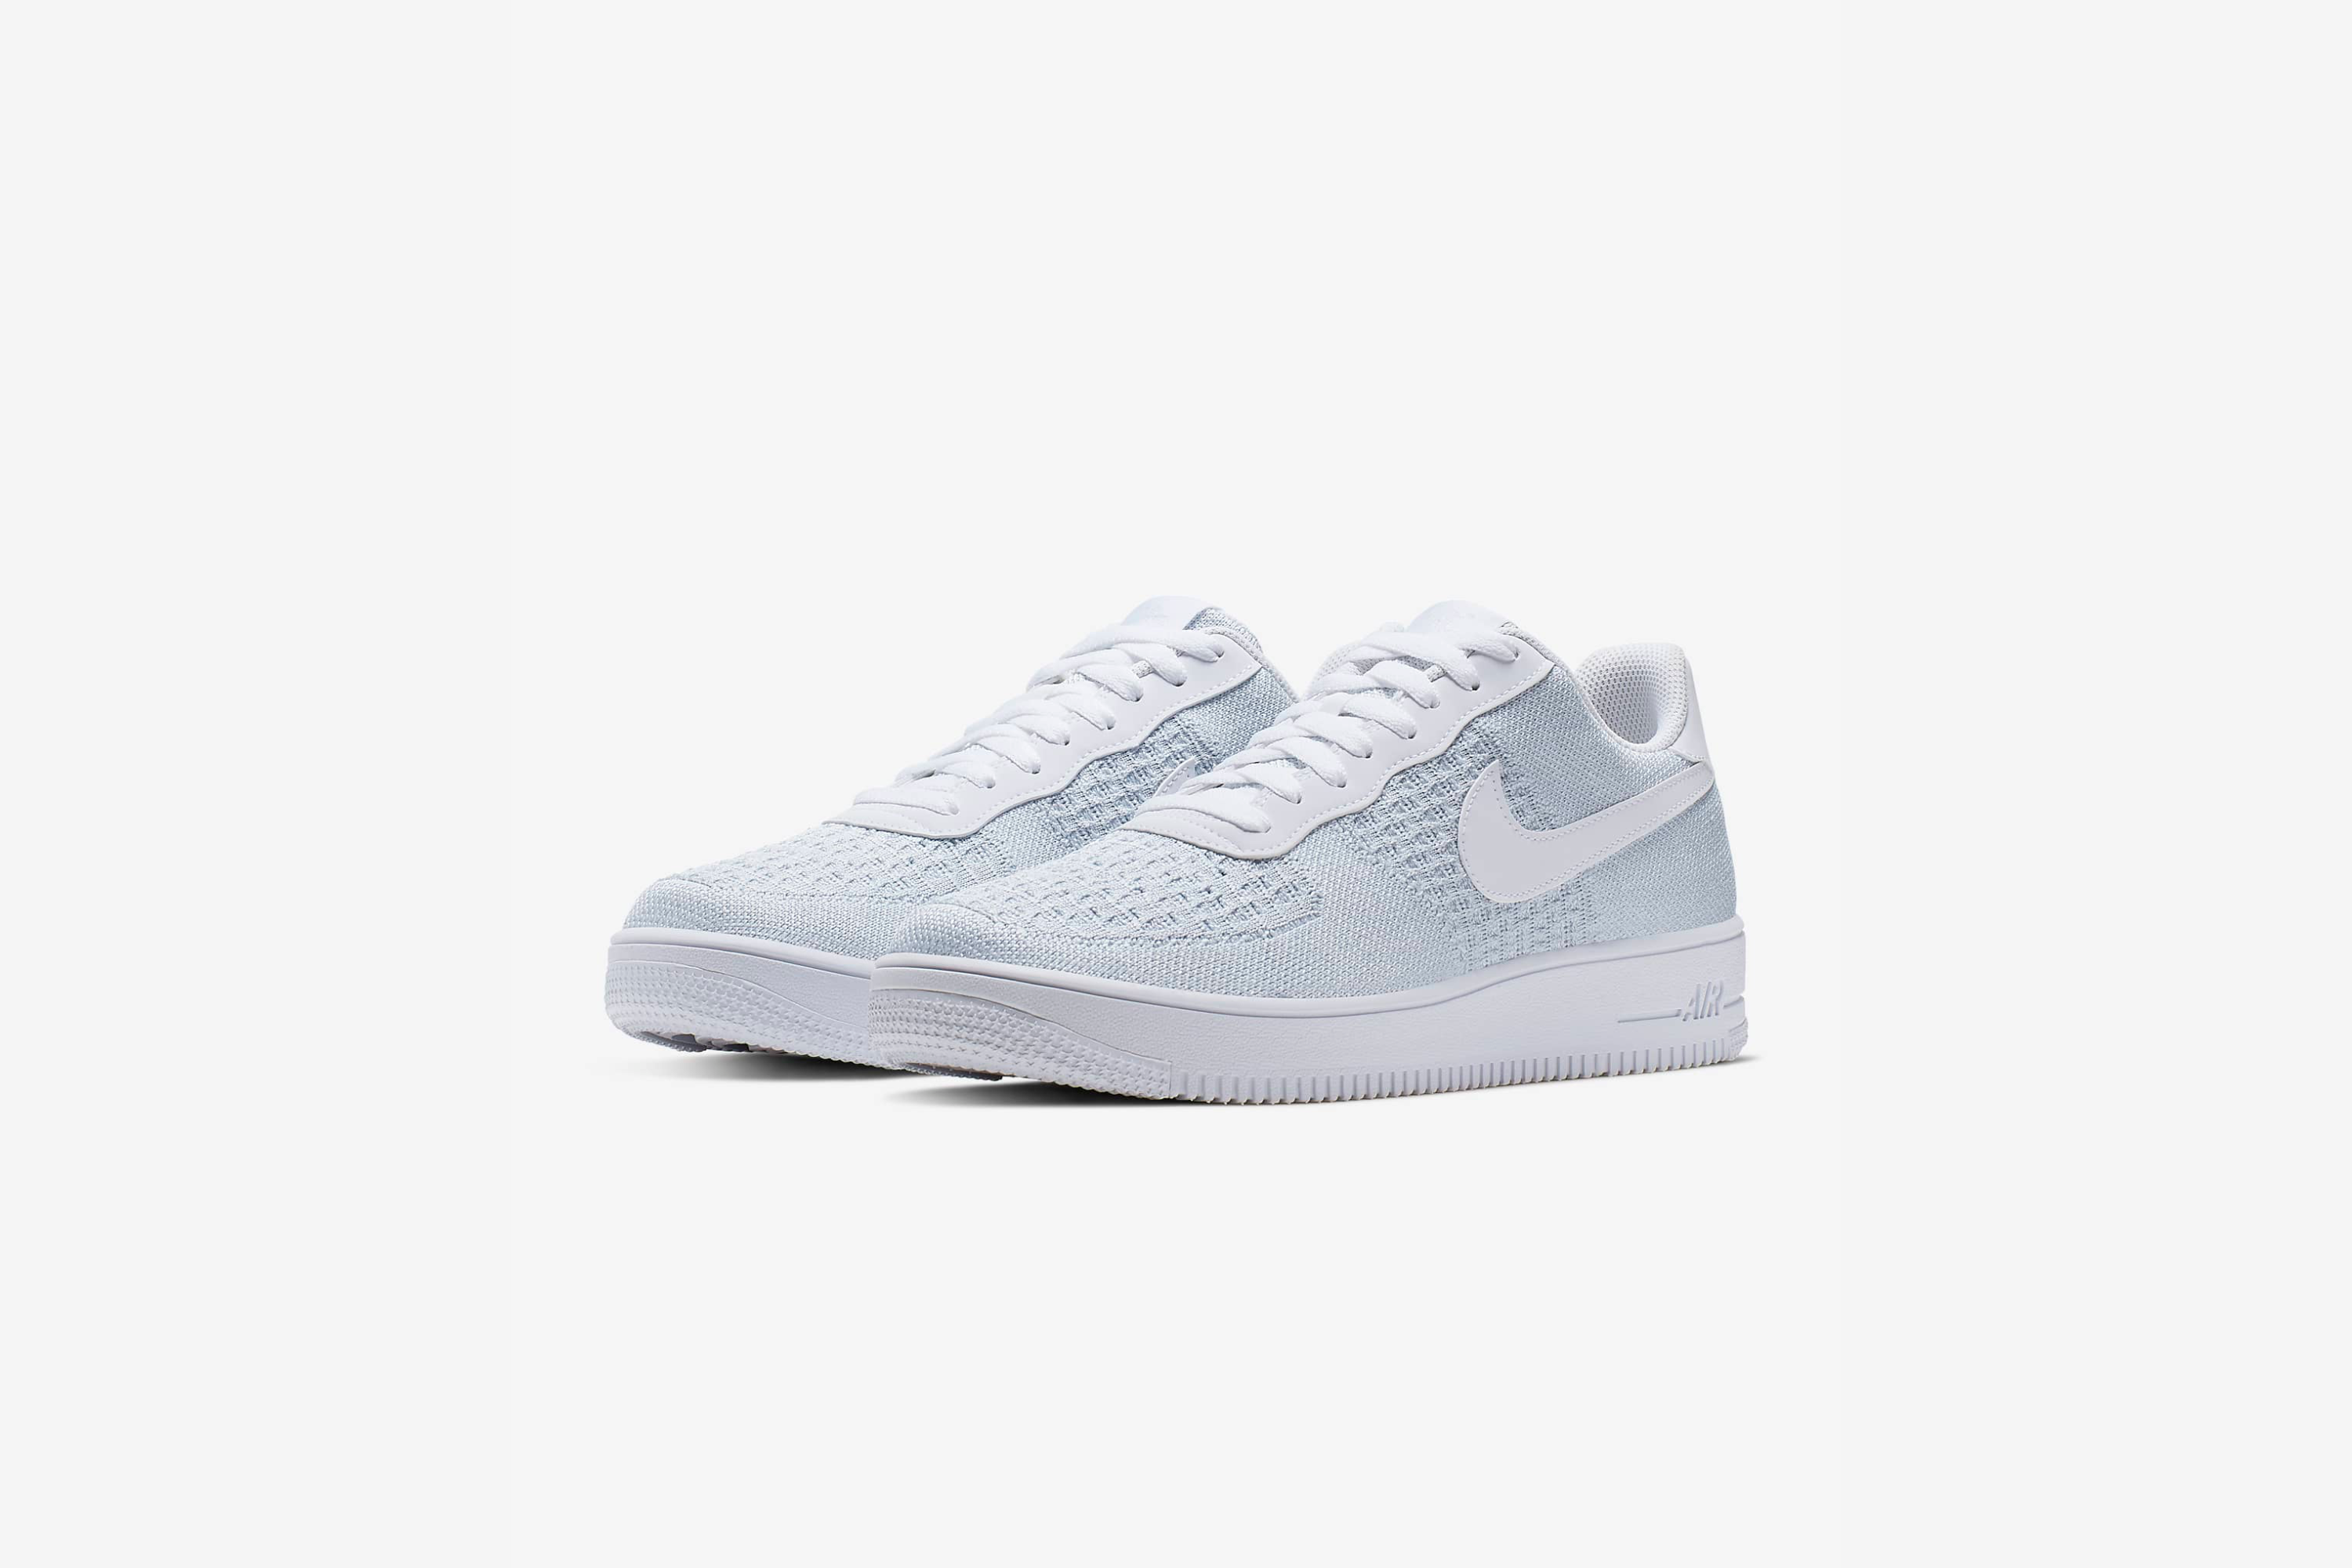 Nike Air Force 1 Flyknit 2.0 'White Pure Platinum'